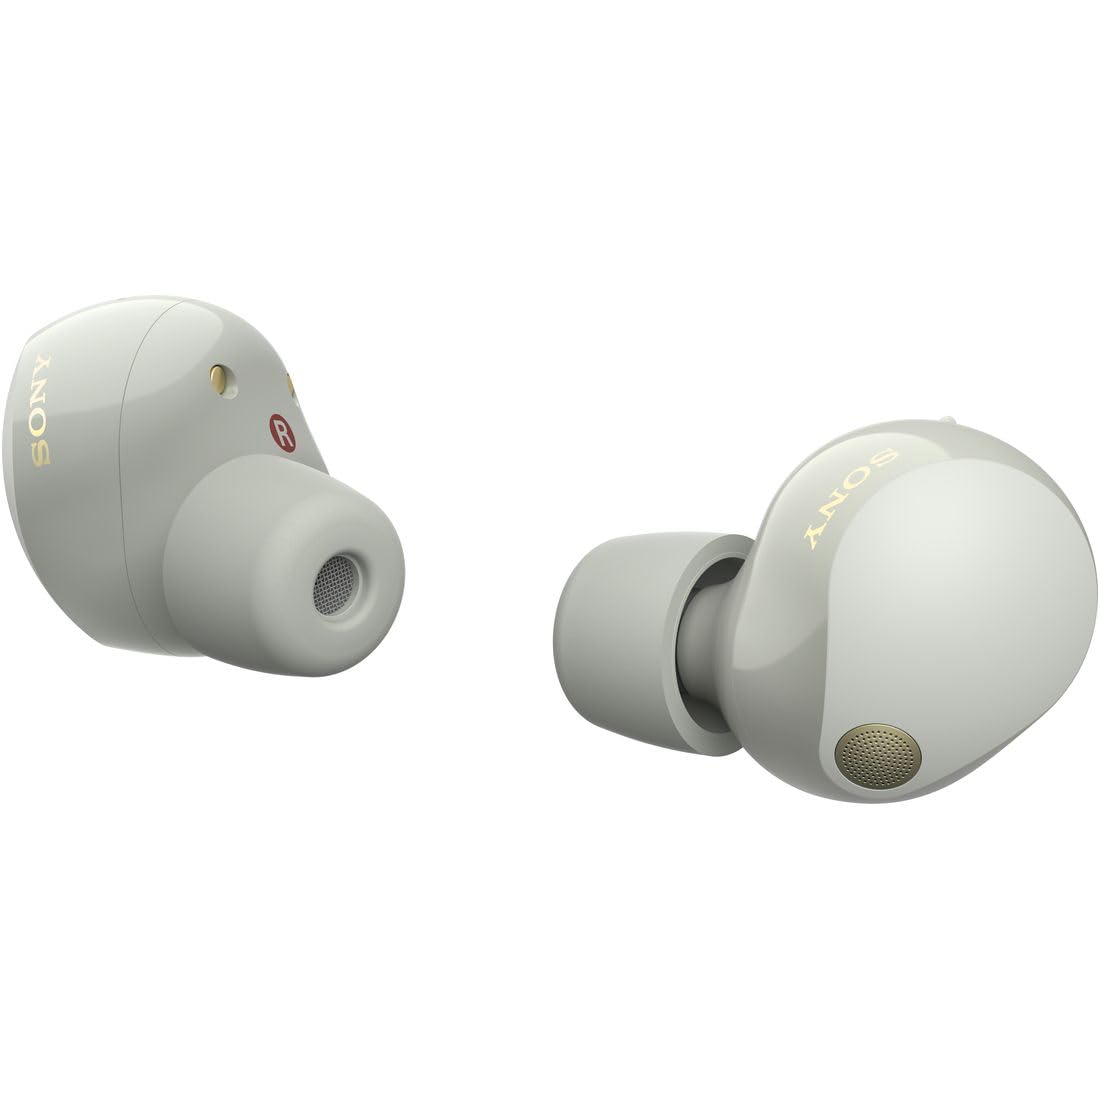 Sony WF-1000XM5 The Best True Wireless Noise-Canceling Earbuds, Alexa Built-in, Bluetooth, in-Ear Headphones, Up to 24 Hrs Battery, Quick Charge, IPX4 Rating, Works with iOS & Android - Silver/Gold